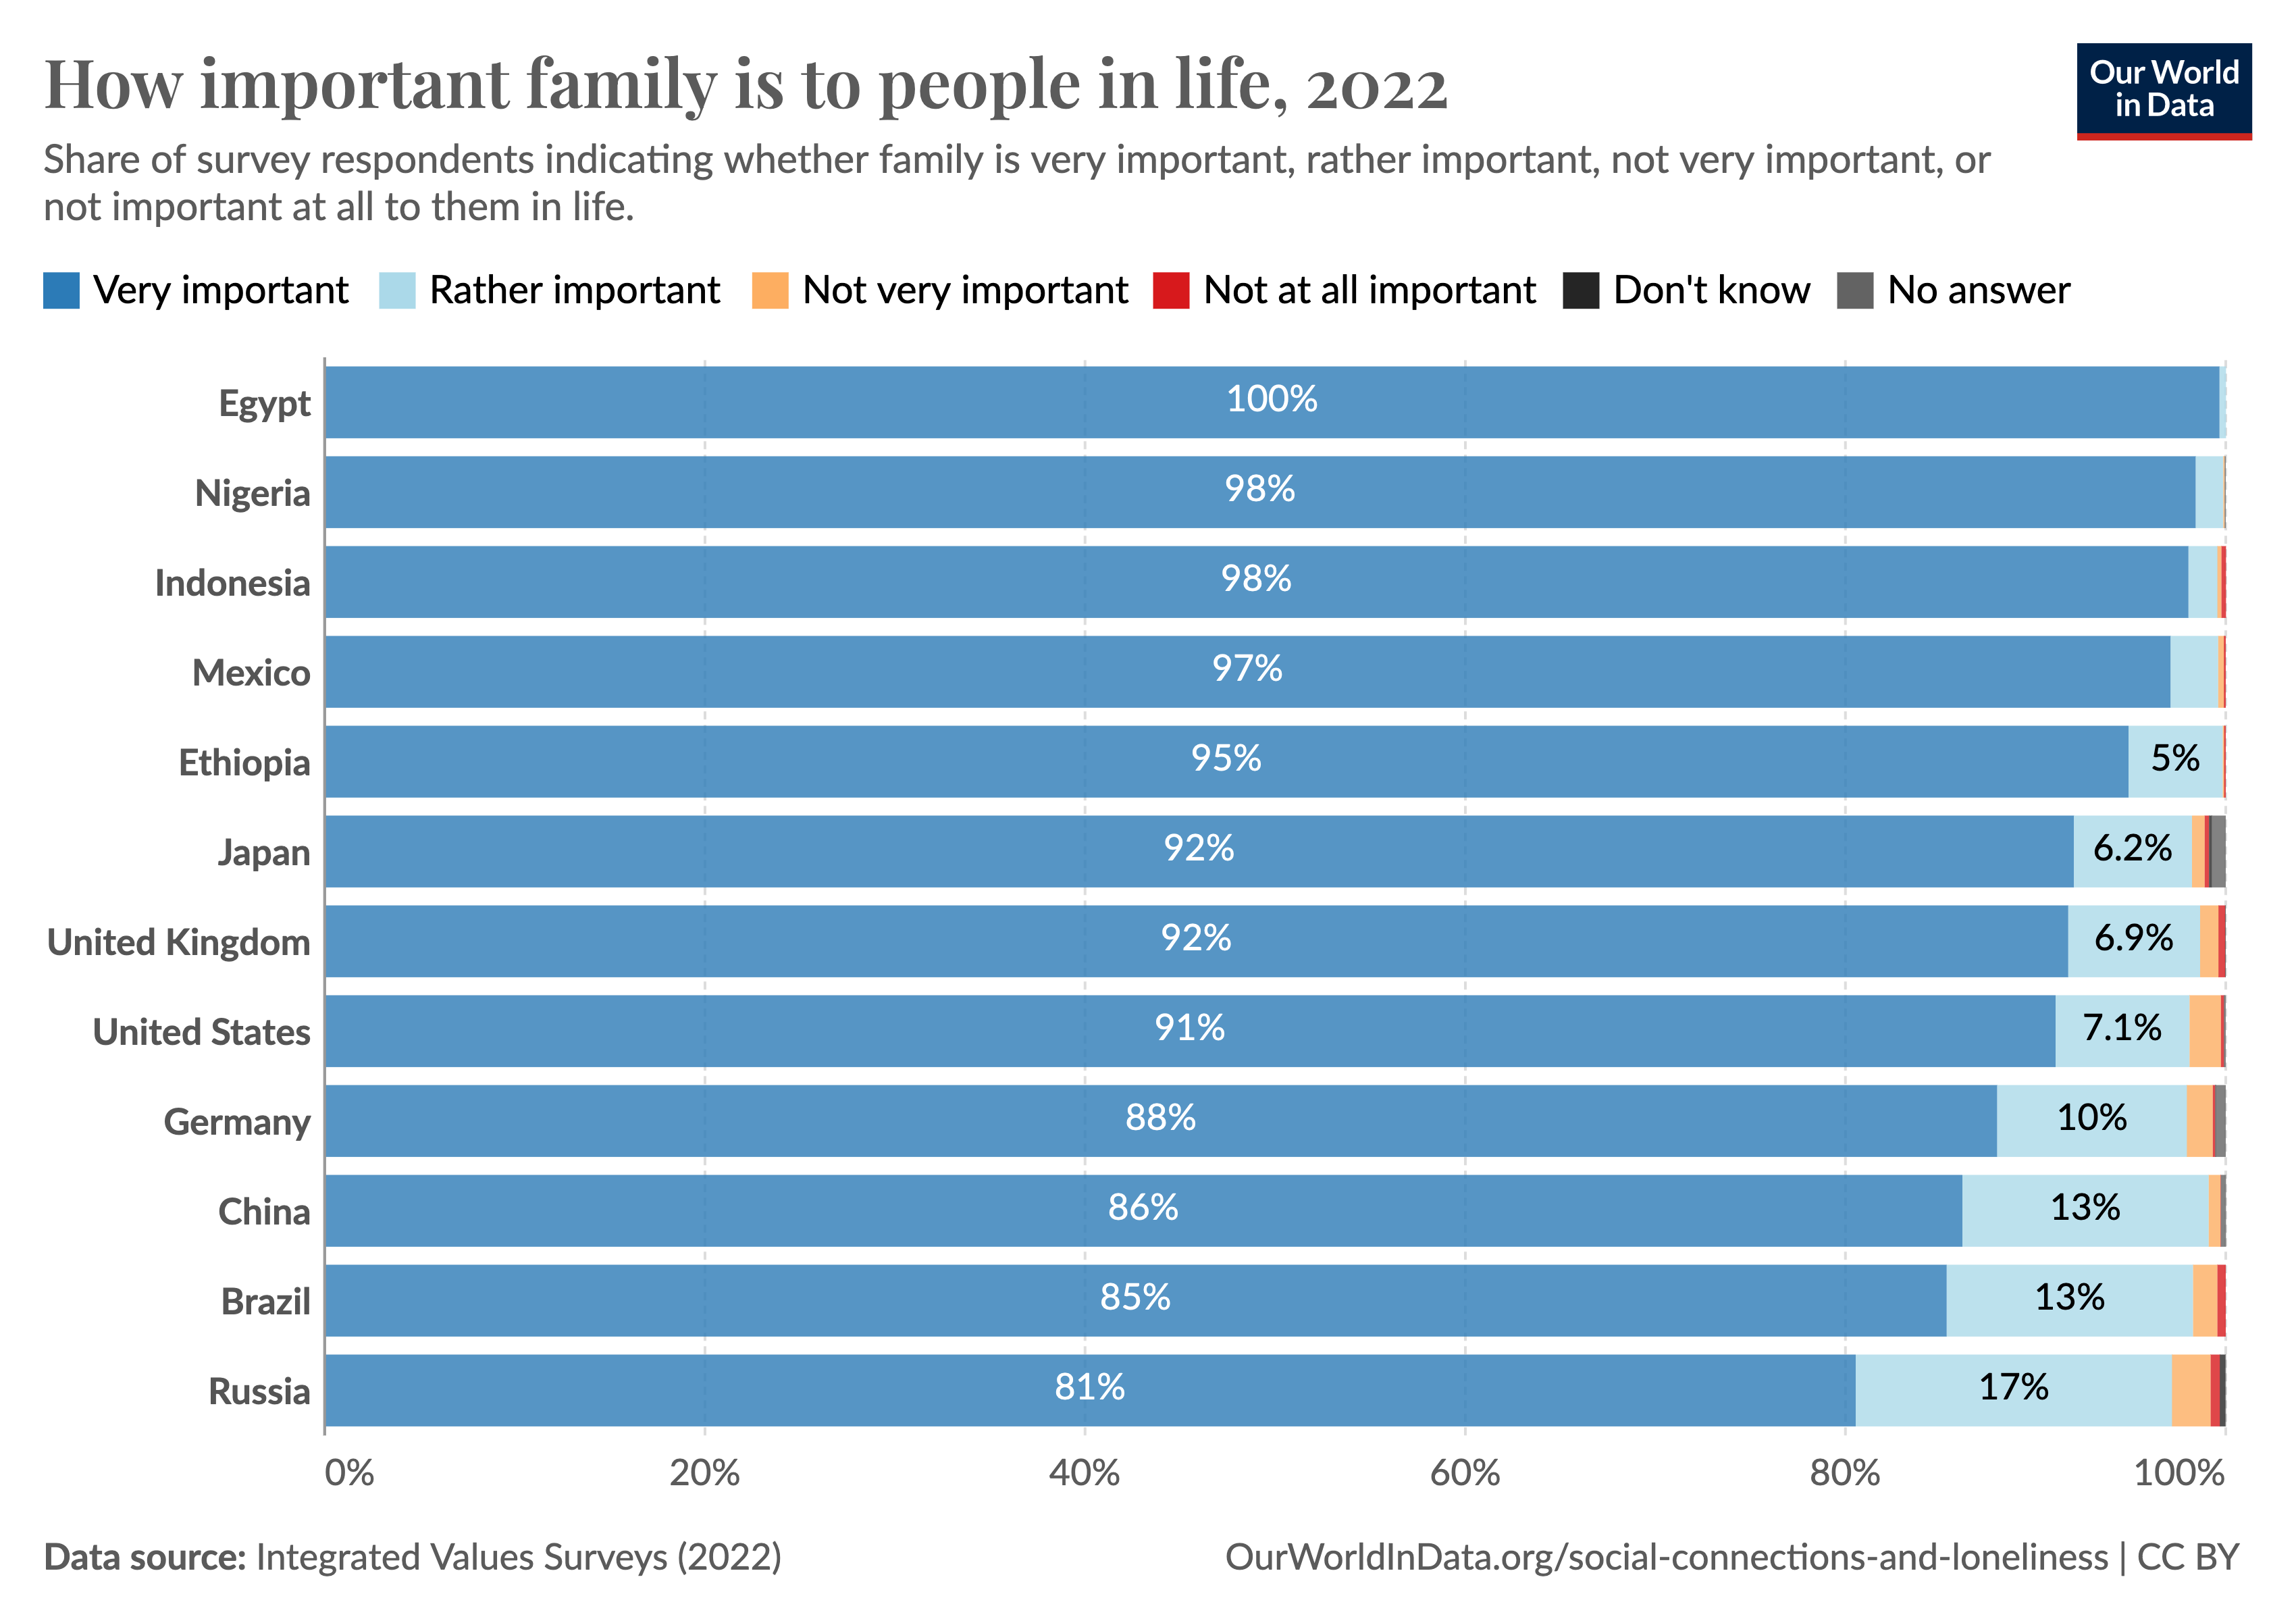 Stacked bar chart showing for selected countries around the world how important family is to people in life. A small percentage finds family not very important or not important at all, almost everyone finds family rather important, and more than 80% of people across countries find family very important.